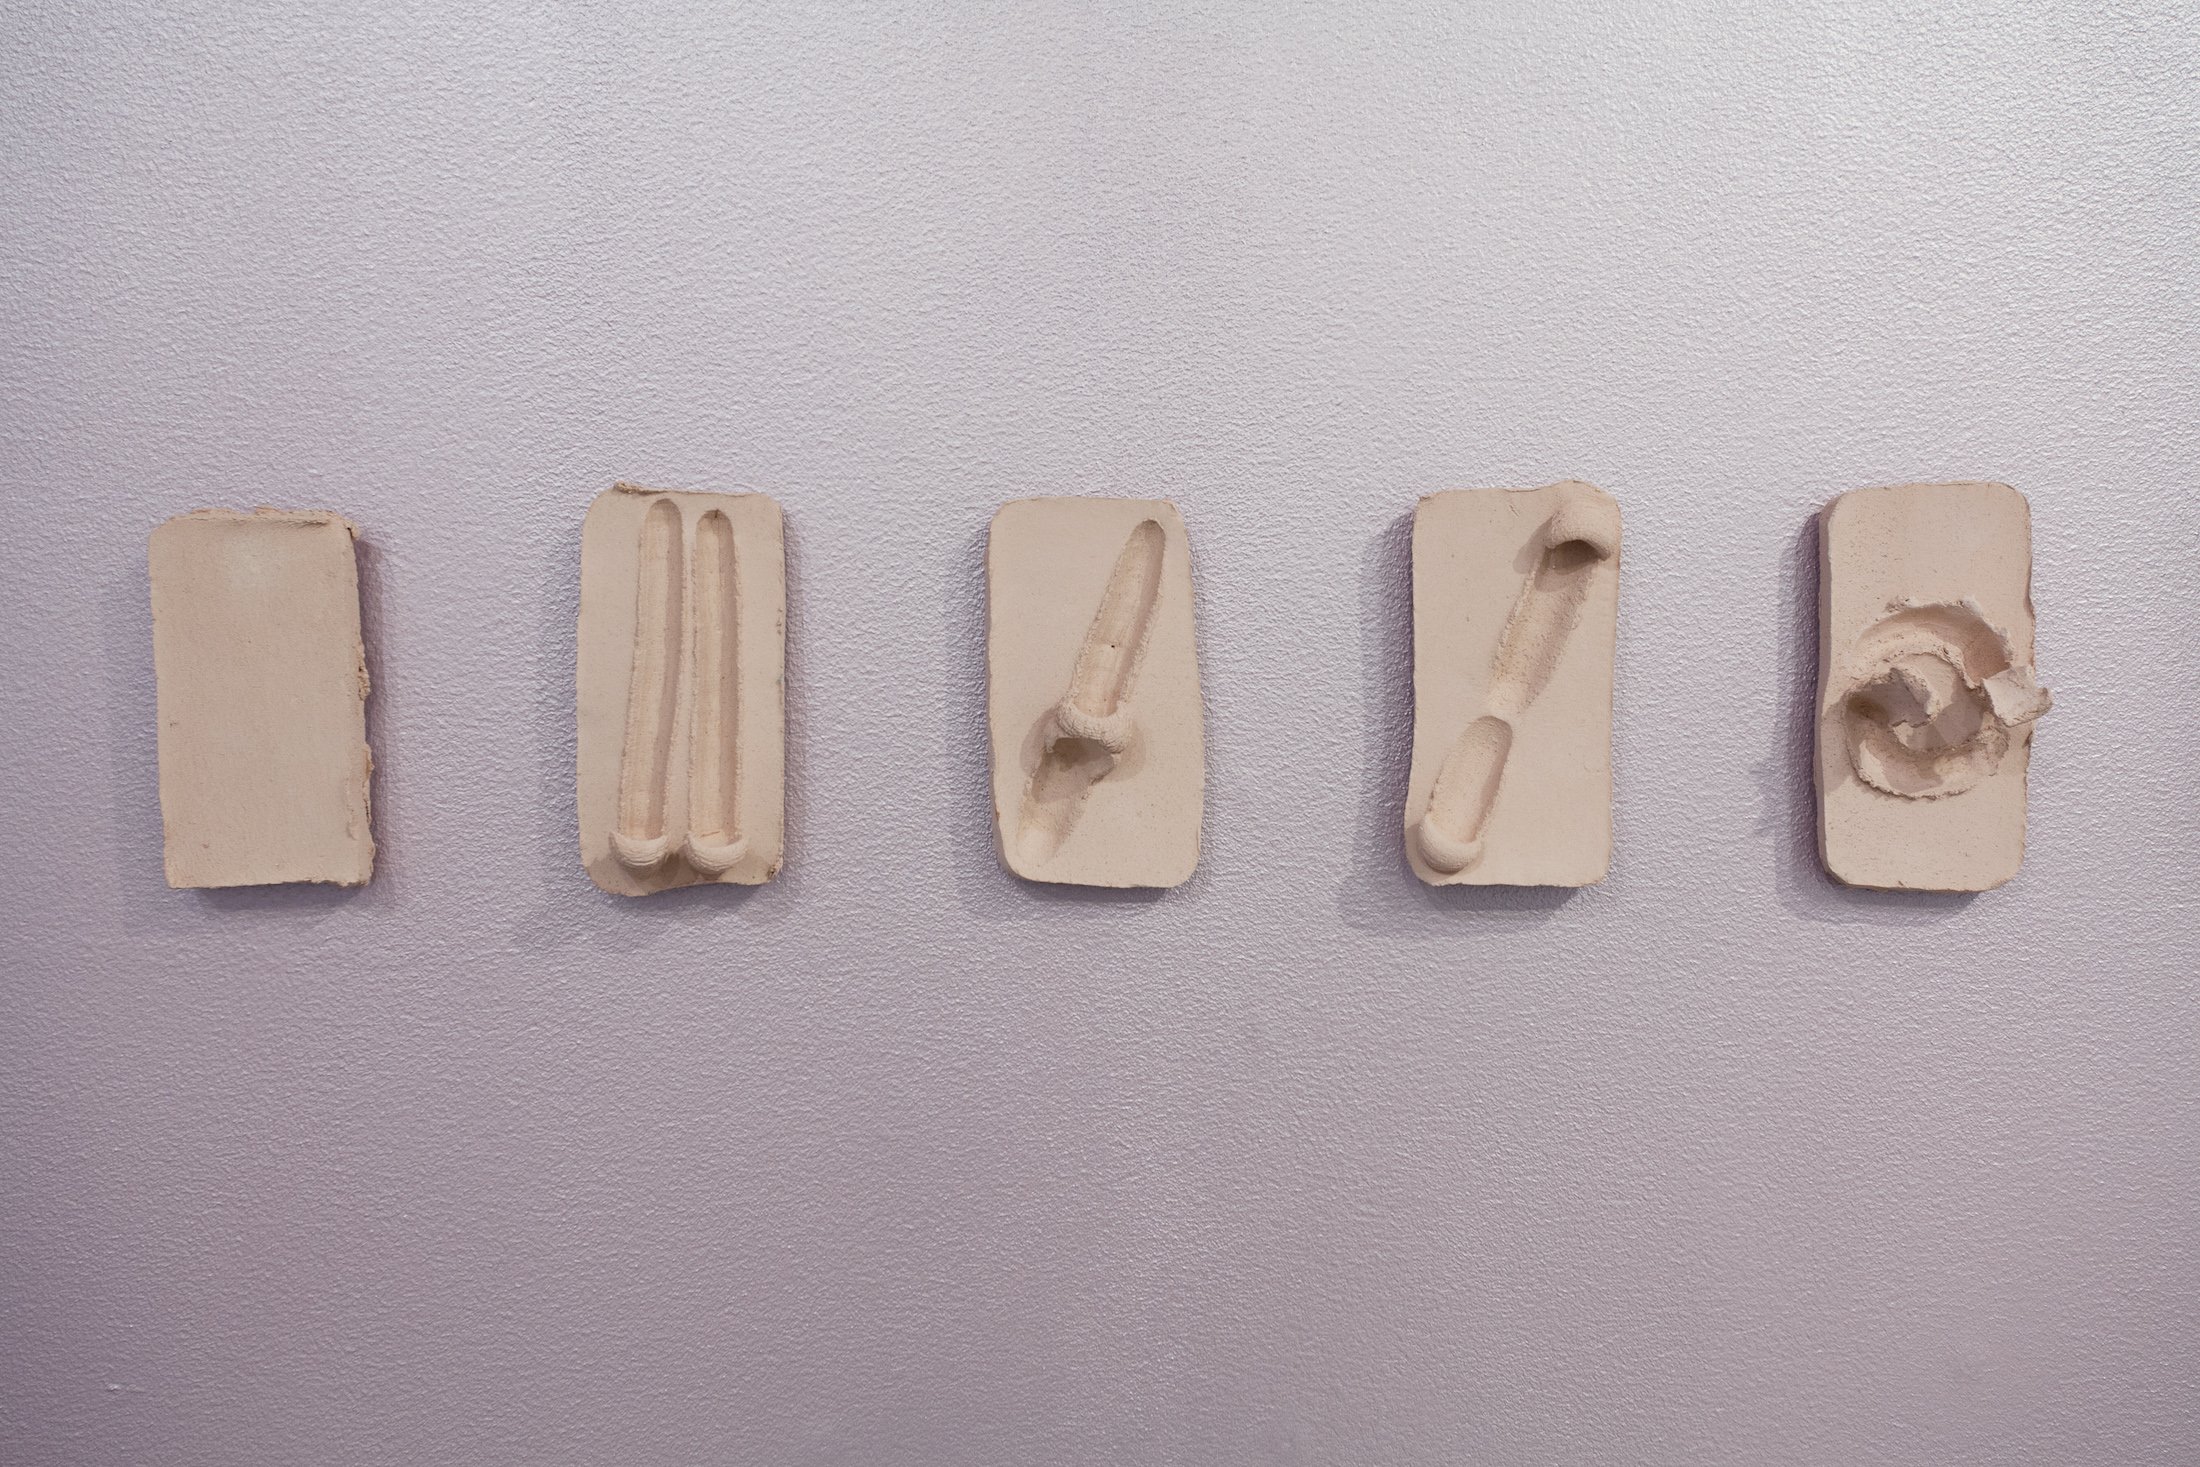 Swipe, Swipe, Swipe, 2017. Signal Center of Contemporary Art, Malmö. Here, Apple-owned “swipe,” “slide to unlock,” and “pinch-to-zoom” gestures that are performed by millions every day are imprinted in clay